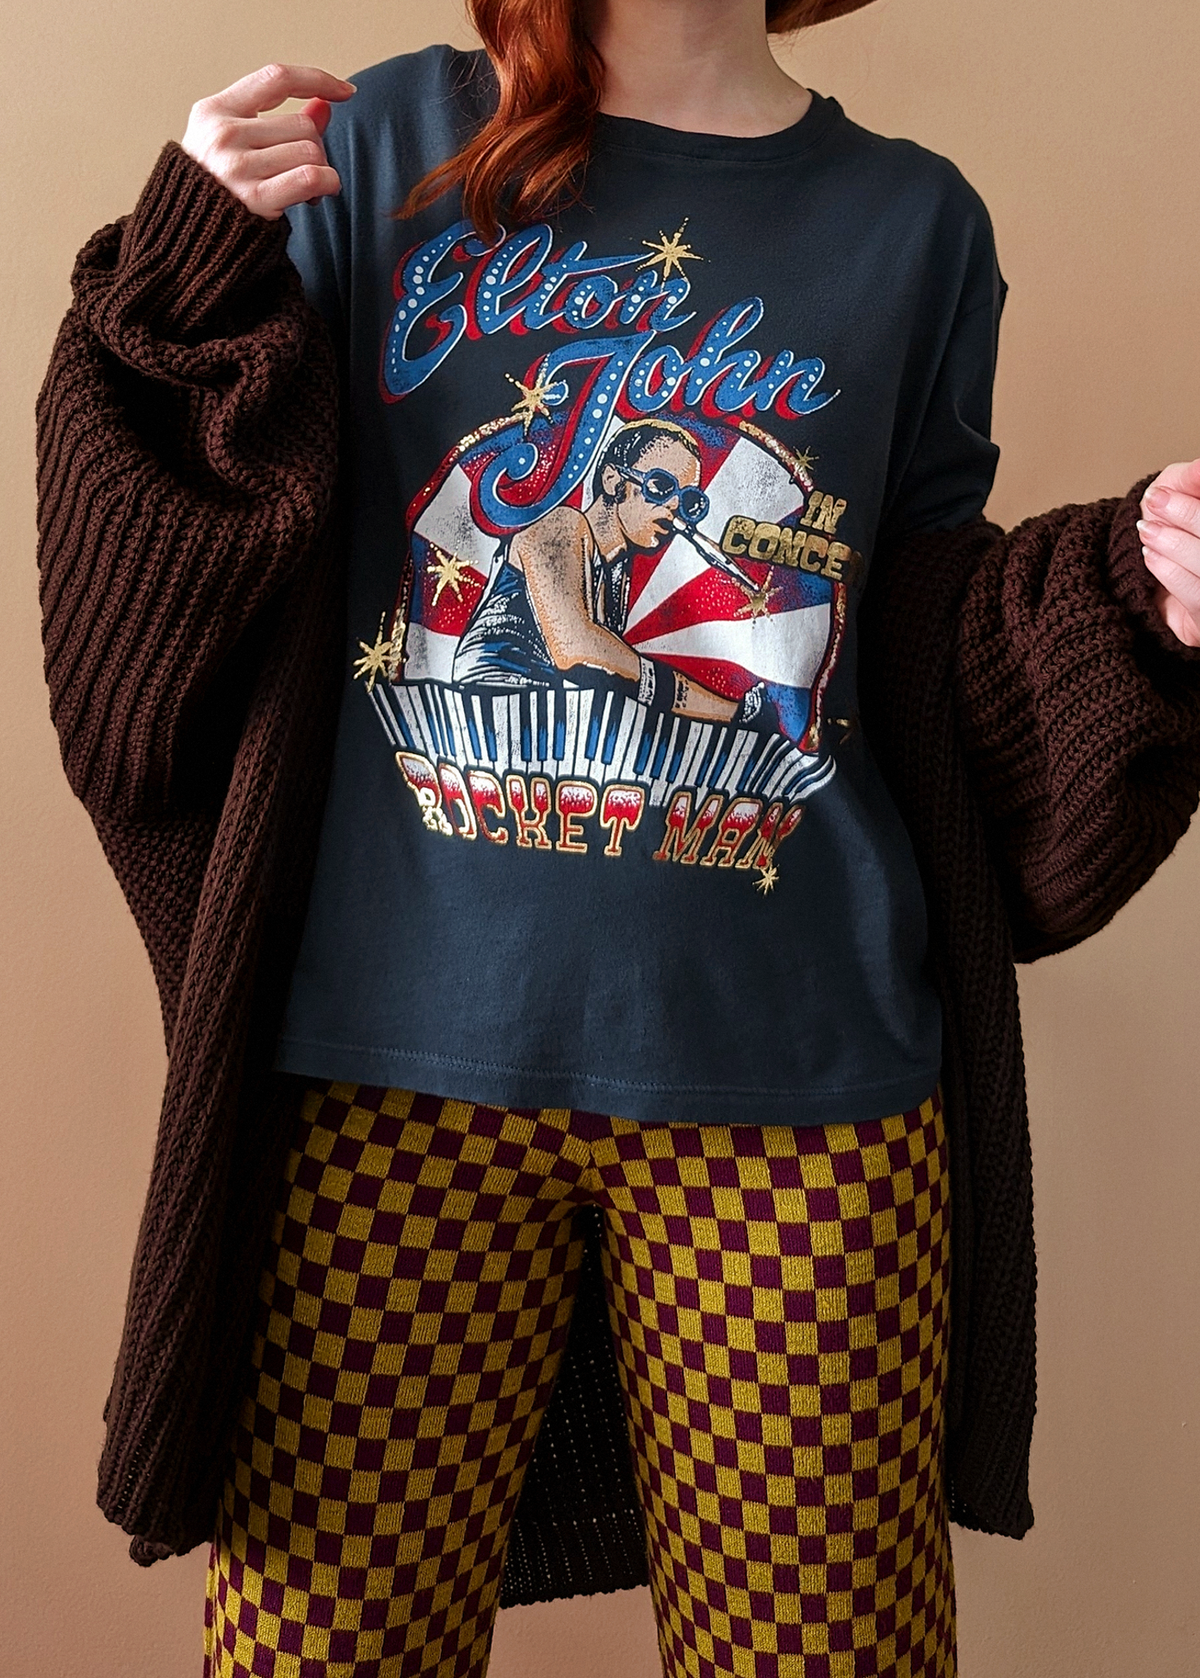 Elton John Rocket Man band tee with gold details by Daydreamer LA, officially licensed and made in California 